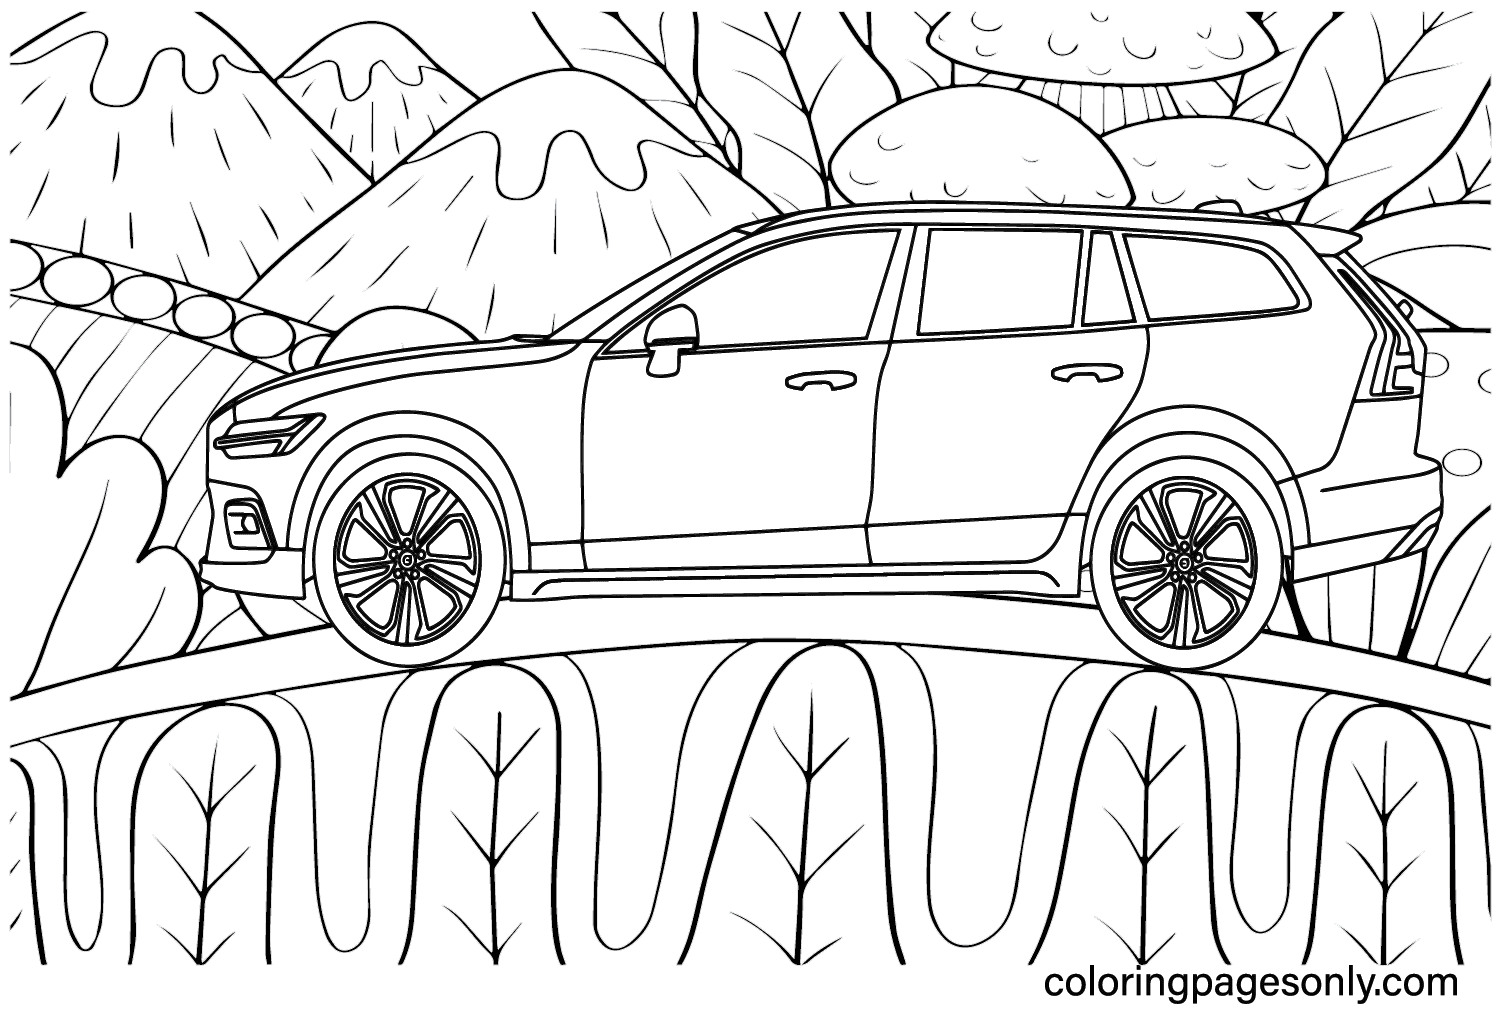 Volvo V60 Cross Country Coloring Page - Free Printable Coloring Pages